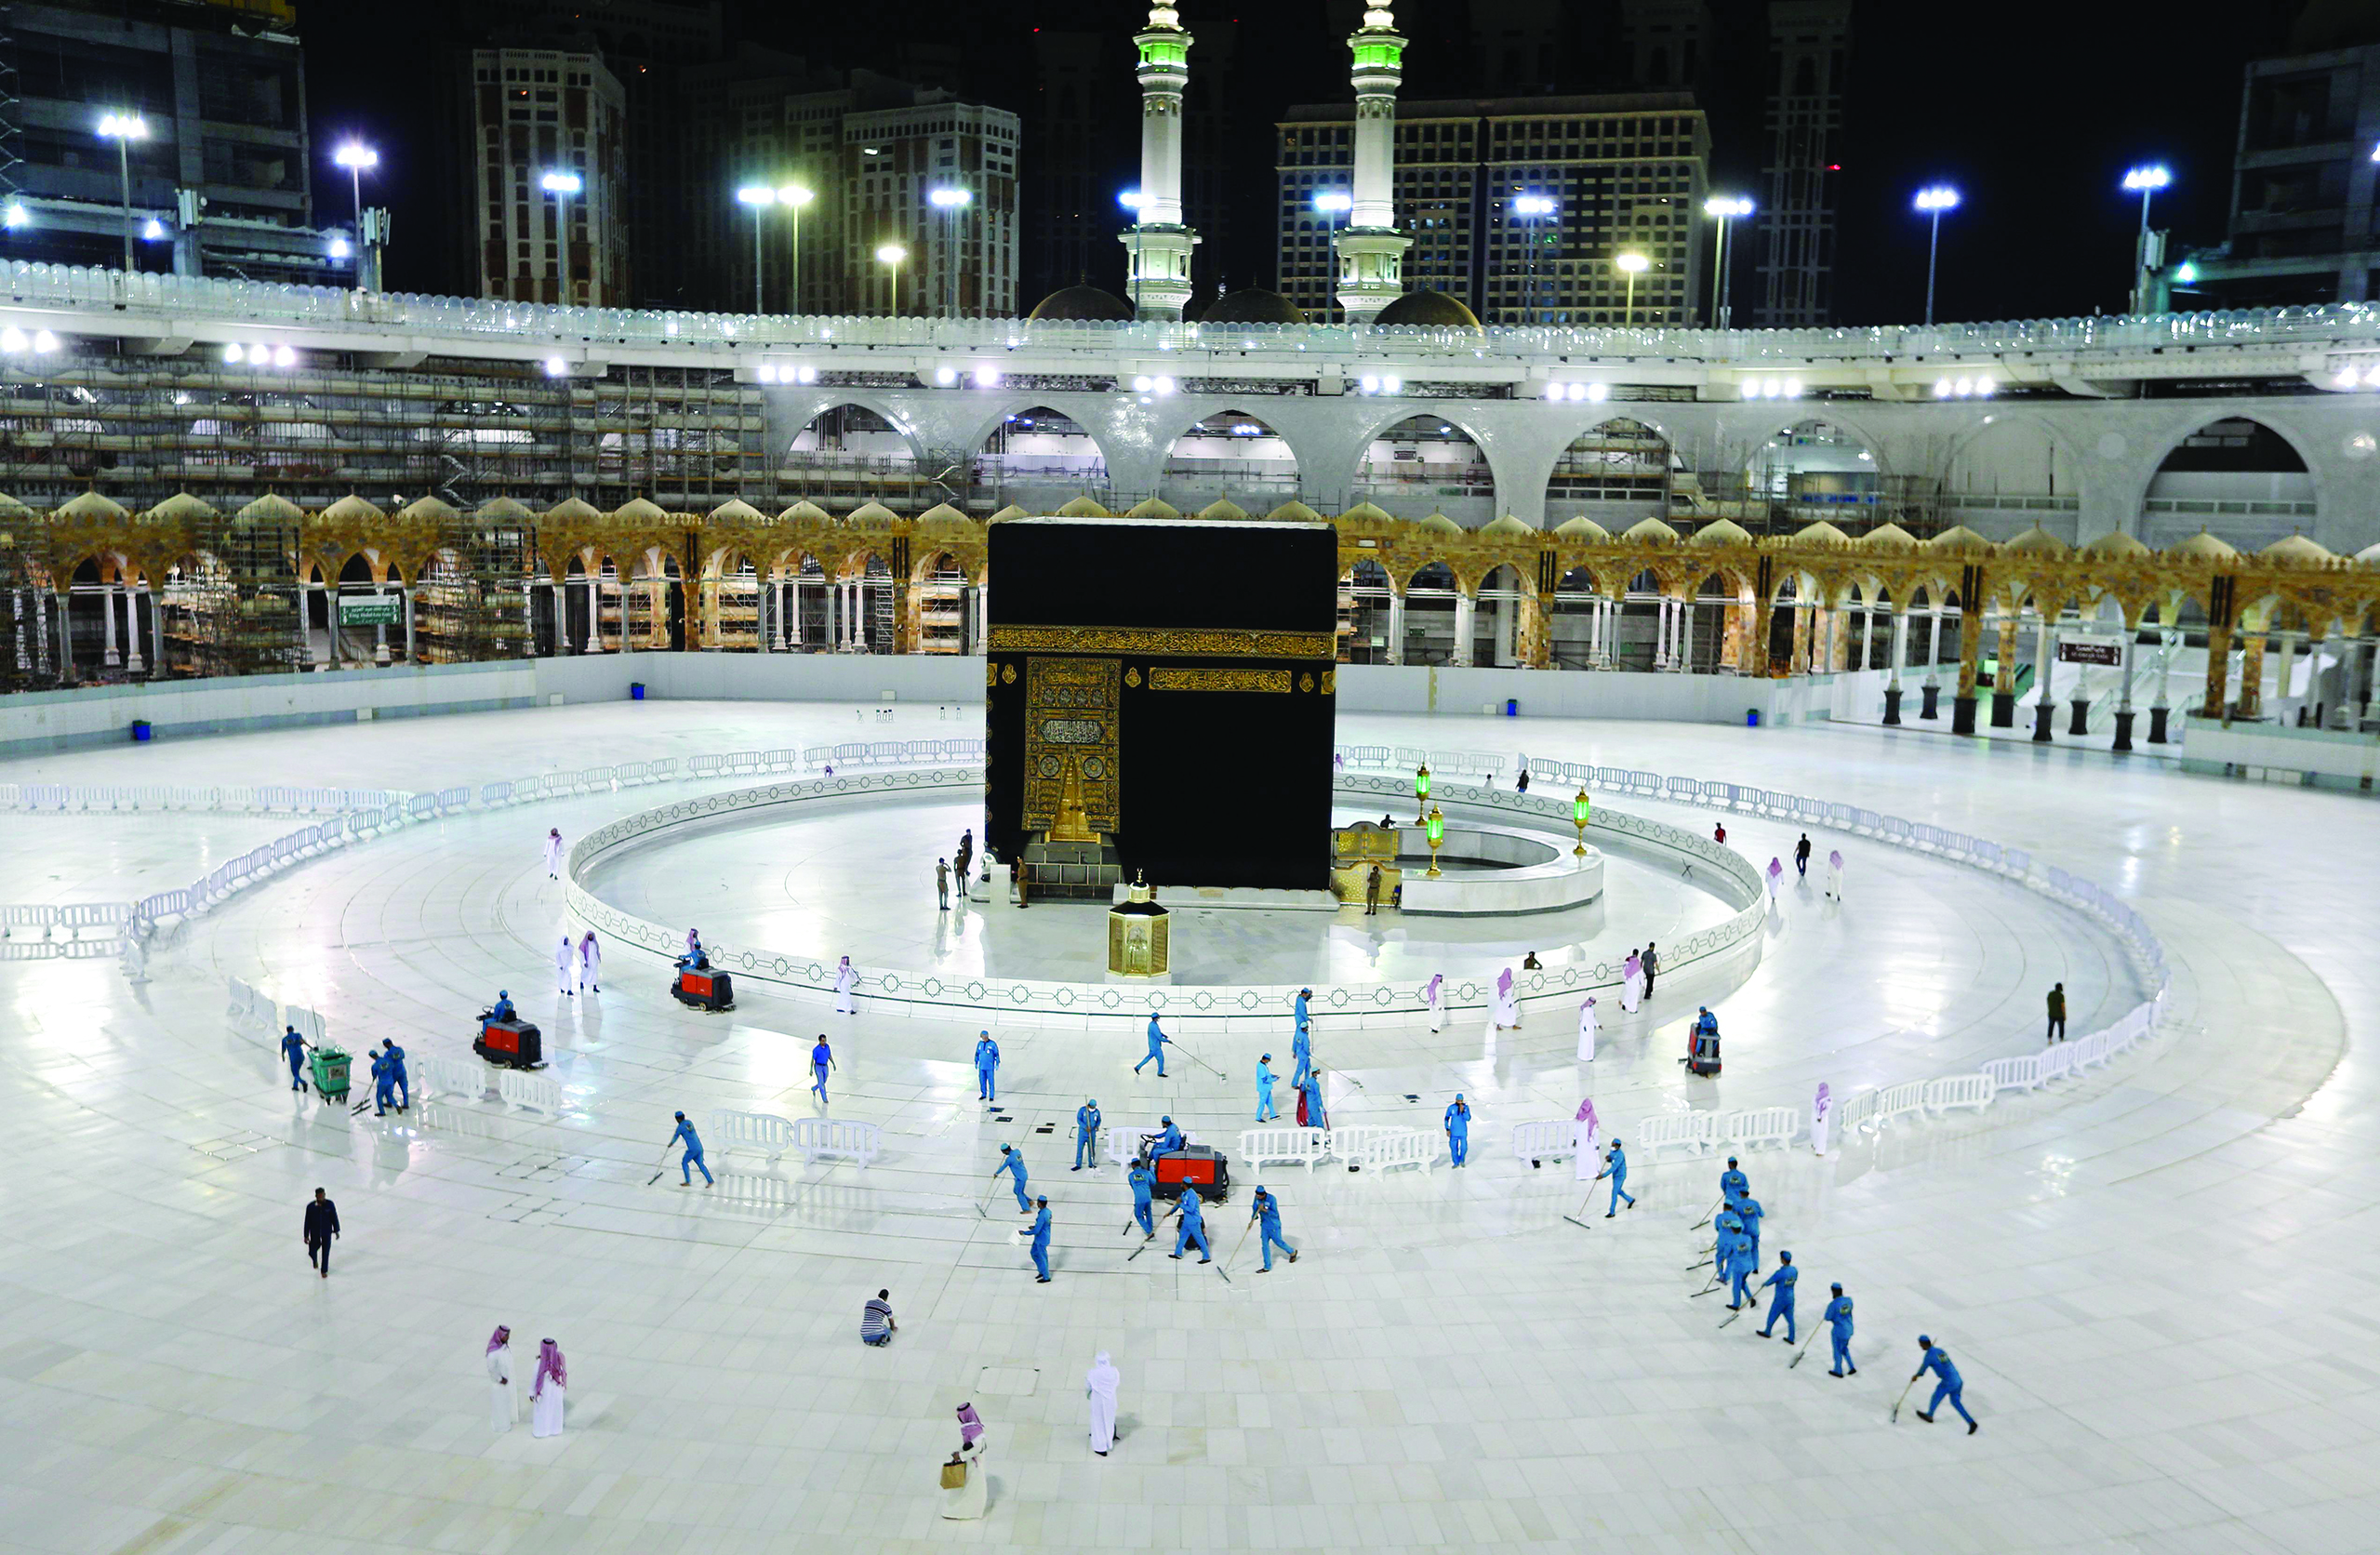 TOPSHOT - A picture taken on April 24, 2020, shows sanitation workers disinfection the area arround the Kaaba in Mecca's Grand Mosque, on the first day of the Islamic holy month of Ramadan, amid unprecedented bans on family gatherings and mass prayers due to the coronavirus (COVID-19) pandemic. (Photo by STR / AFP)